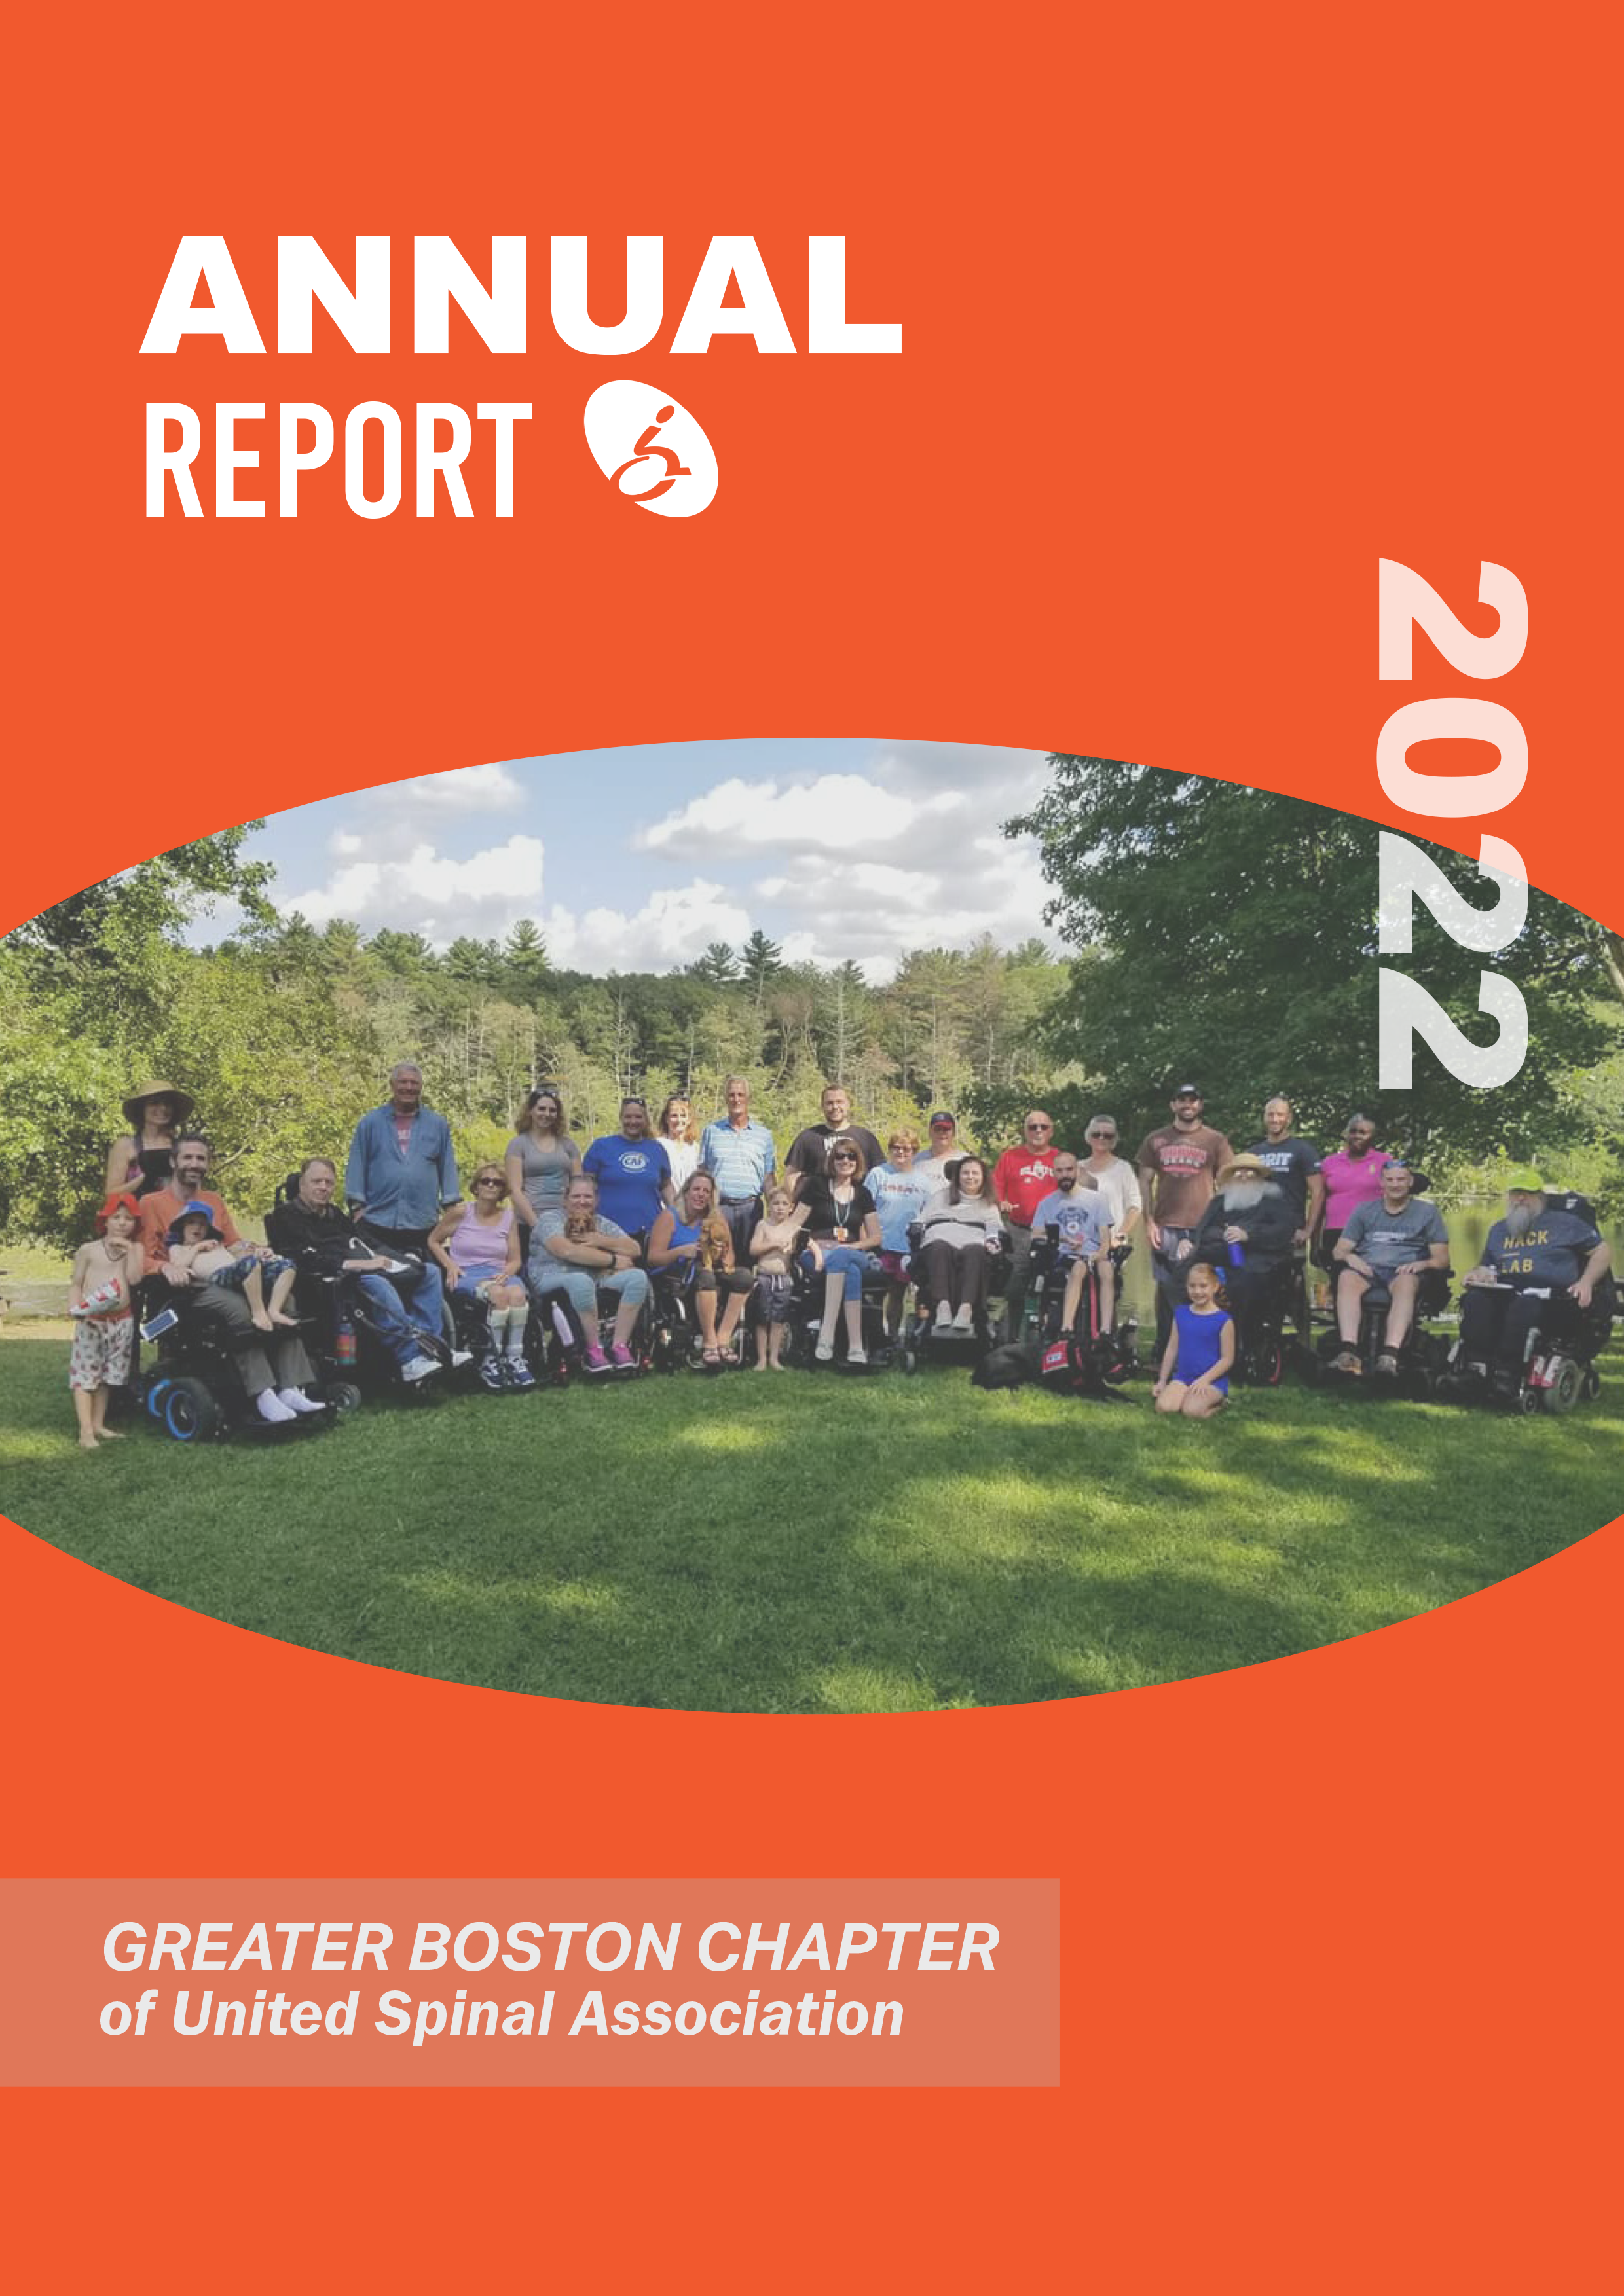 GBC-USA, 2022 Annual Report 1.png